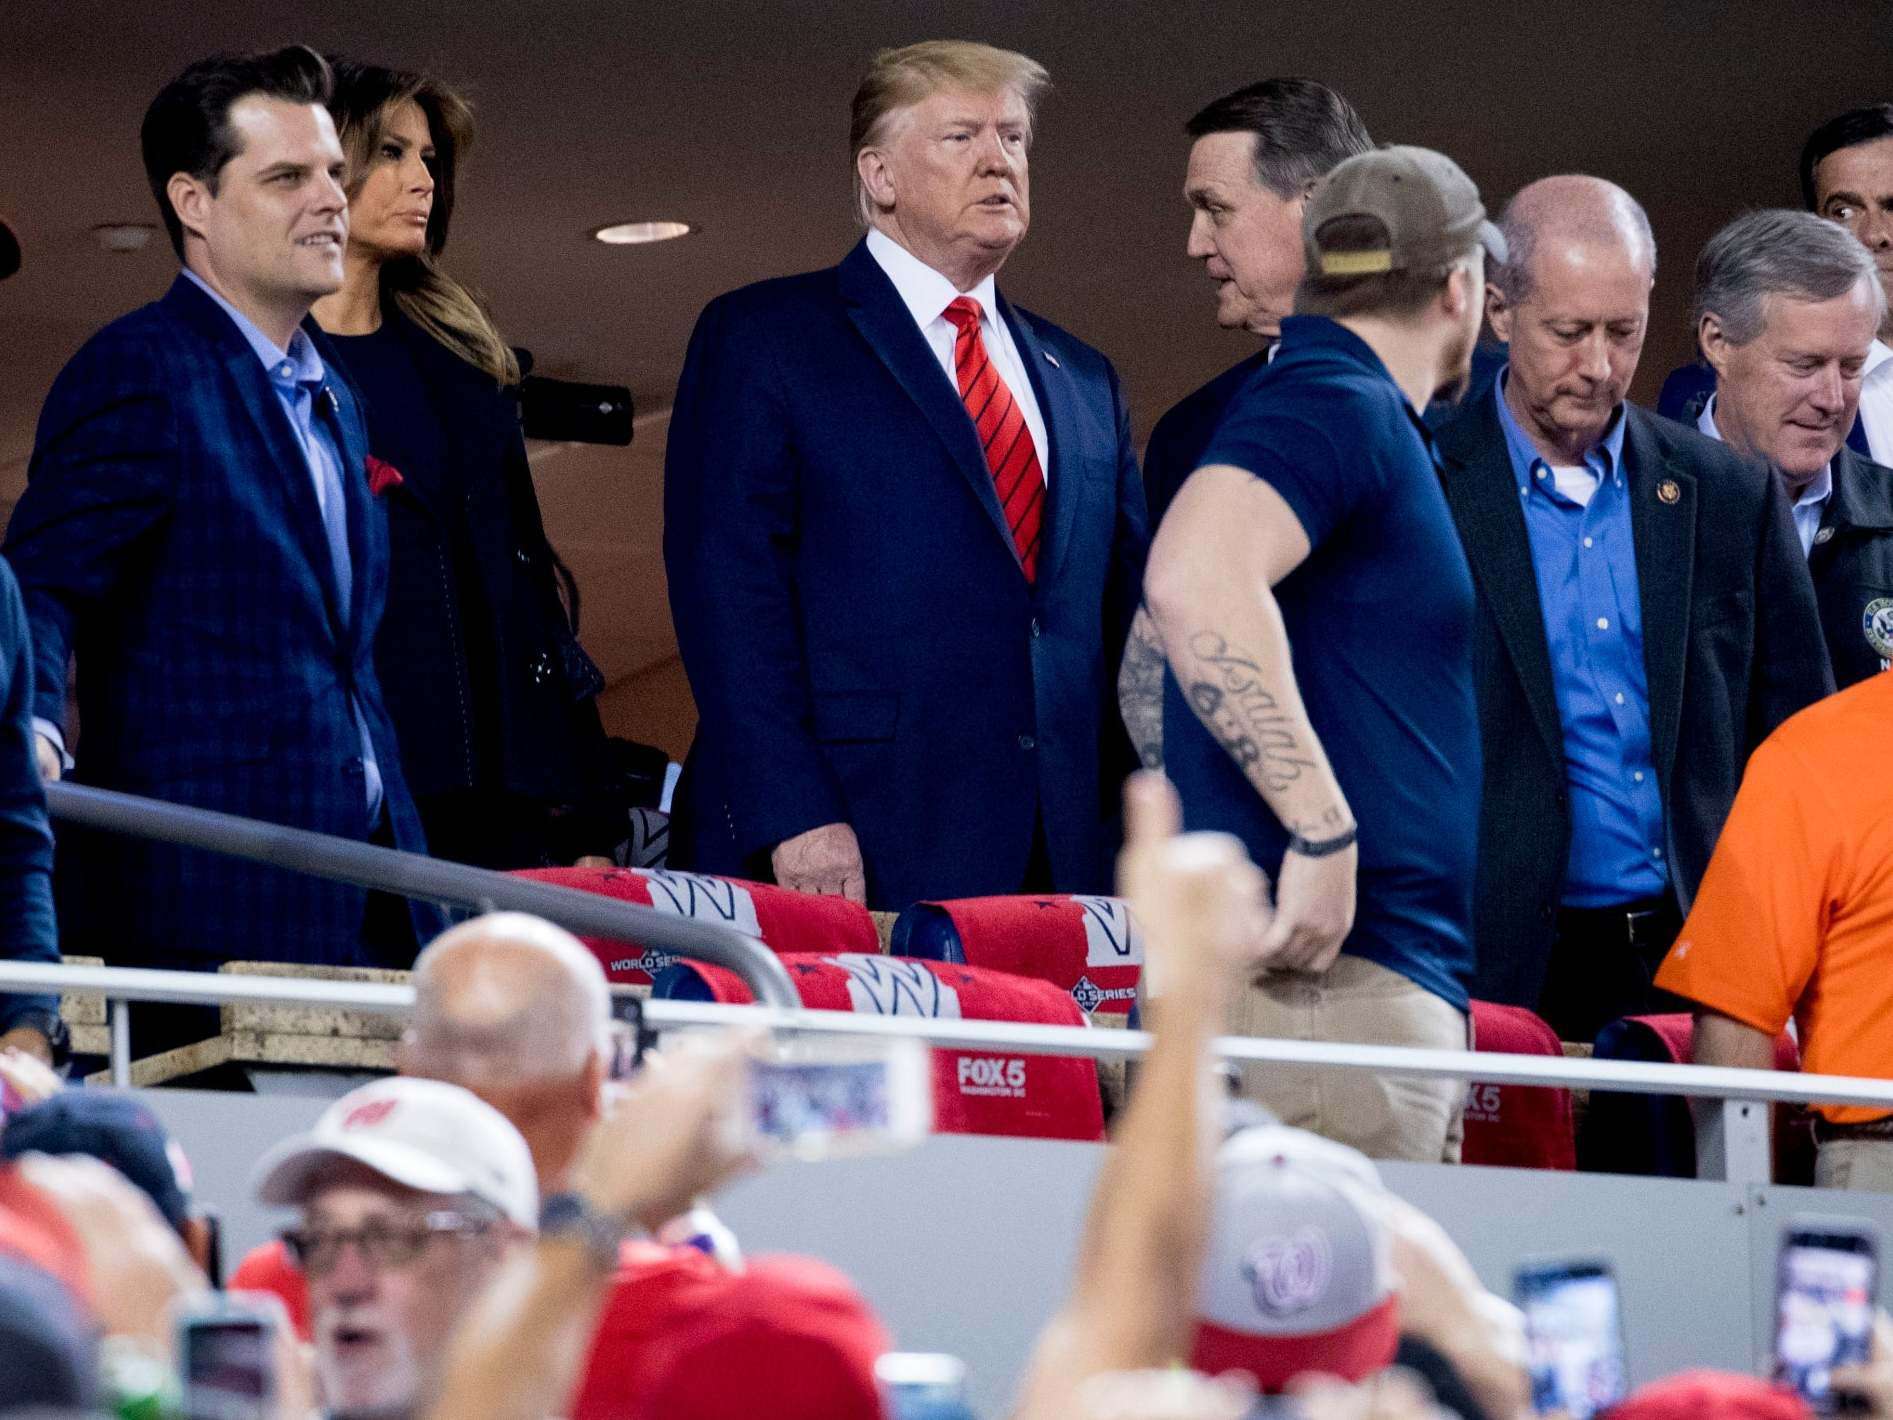 image for Chanting 'lock him up' to Trump at a World Series game is the most American thing ever — and I'm proud we did it